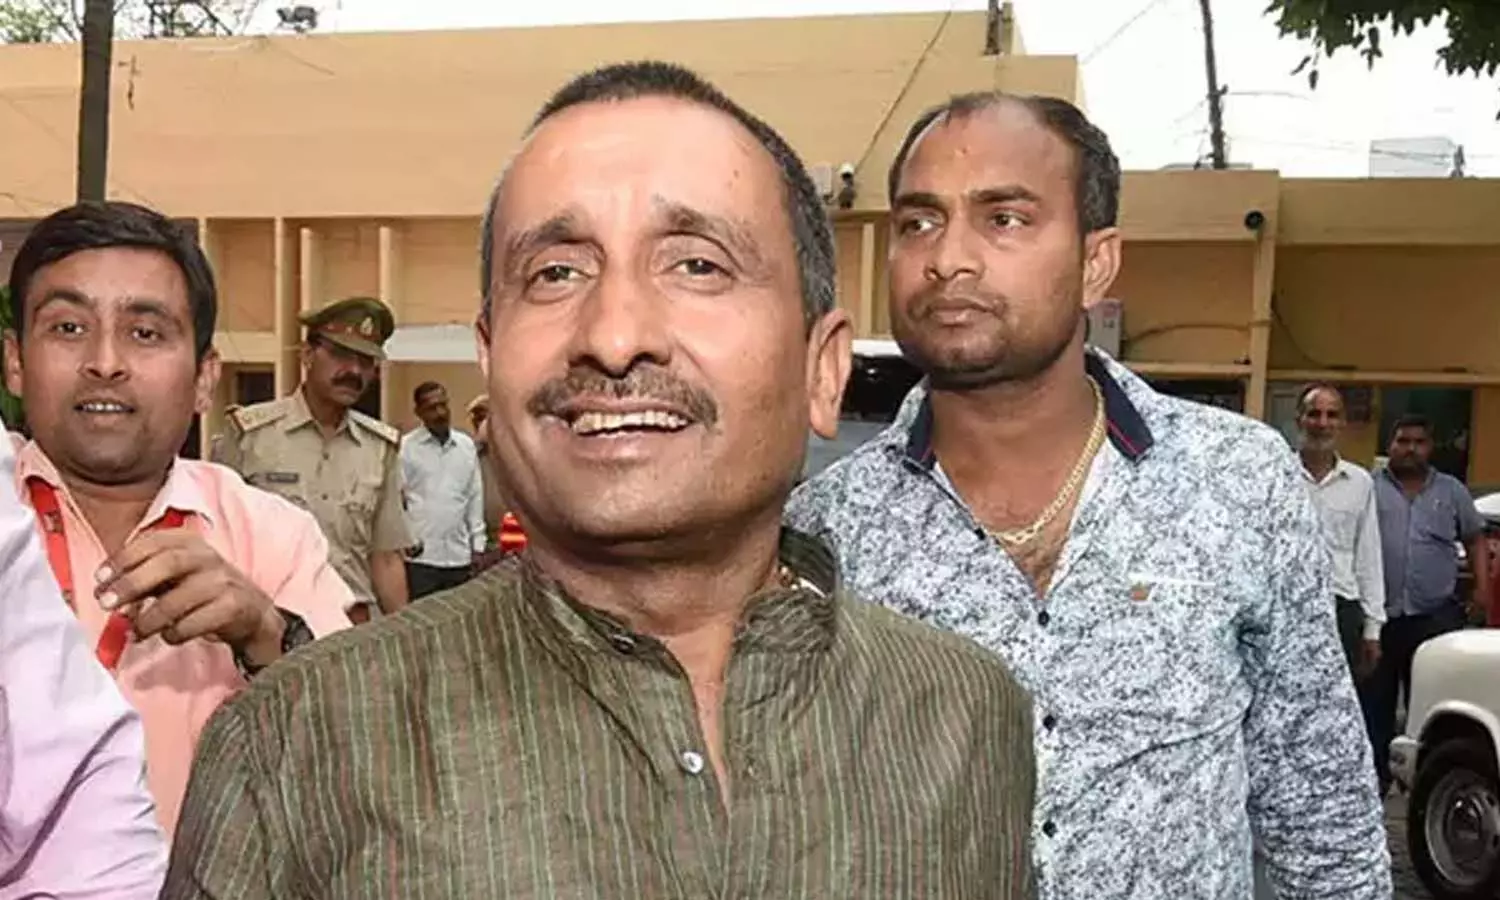 Unnao gang rape case: Kuldeep Sengar, serving life sentence in Unnao gang rape case, acquitted, relief in accident case